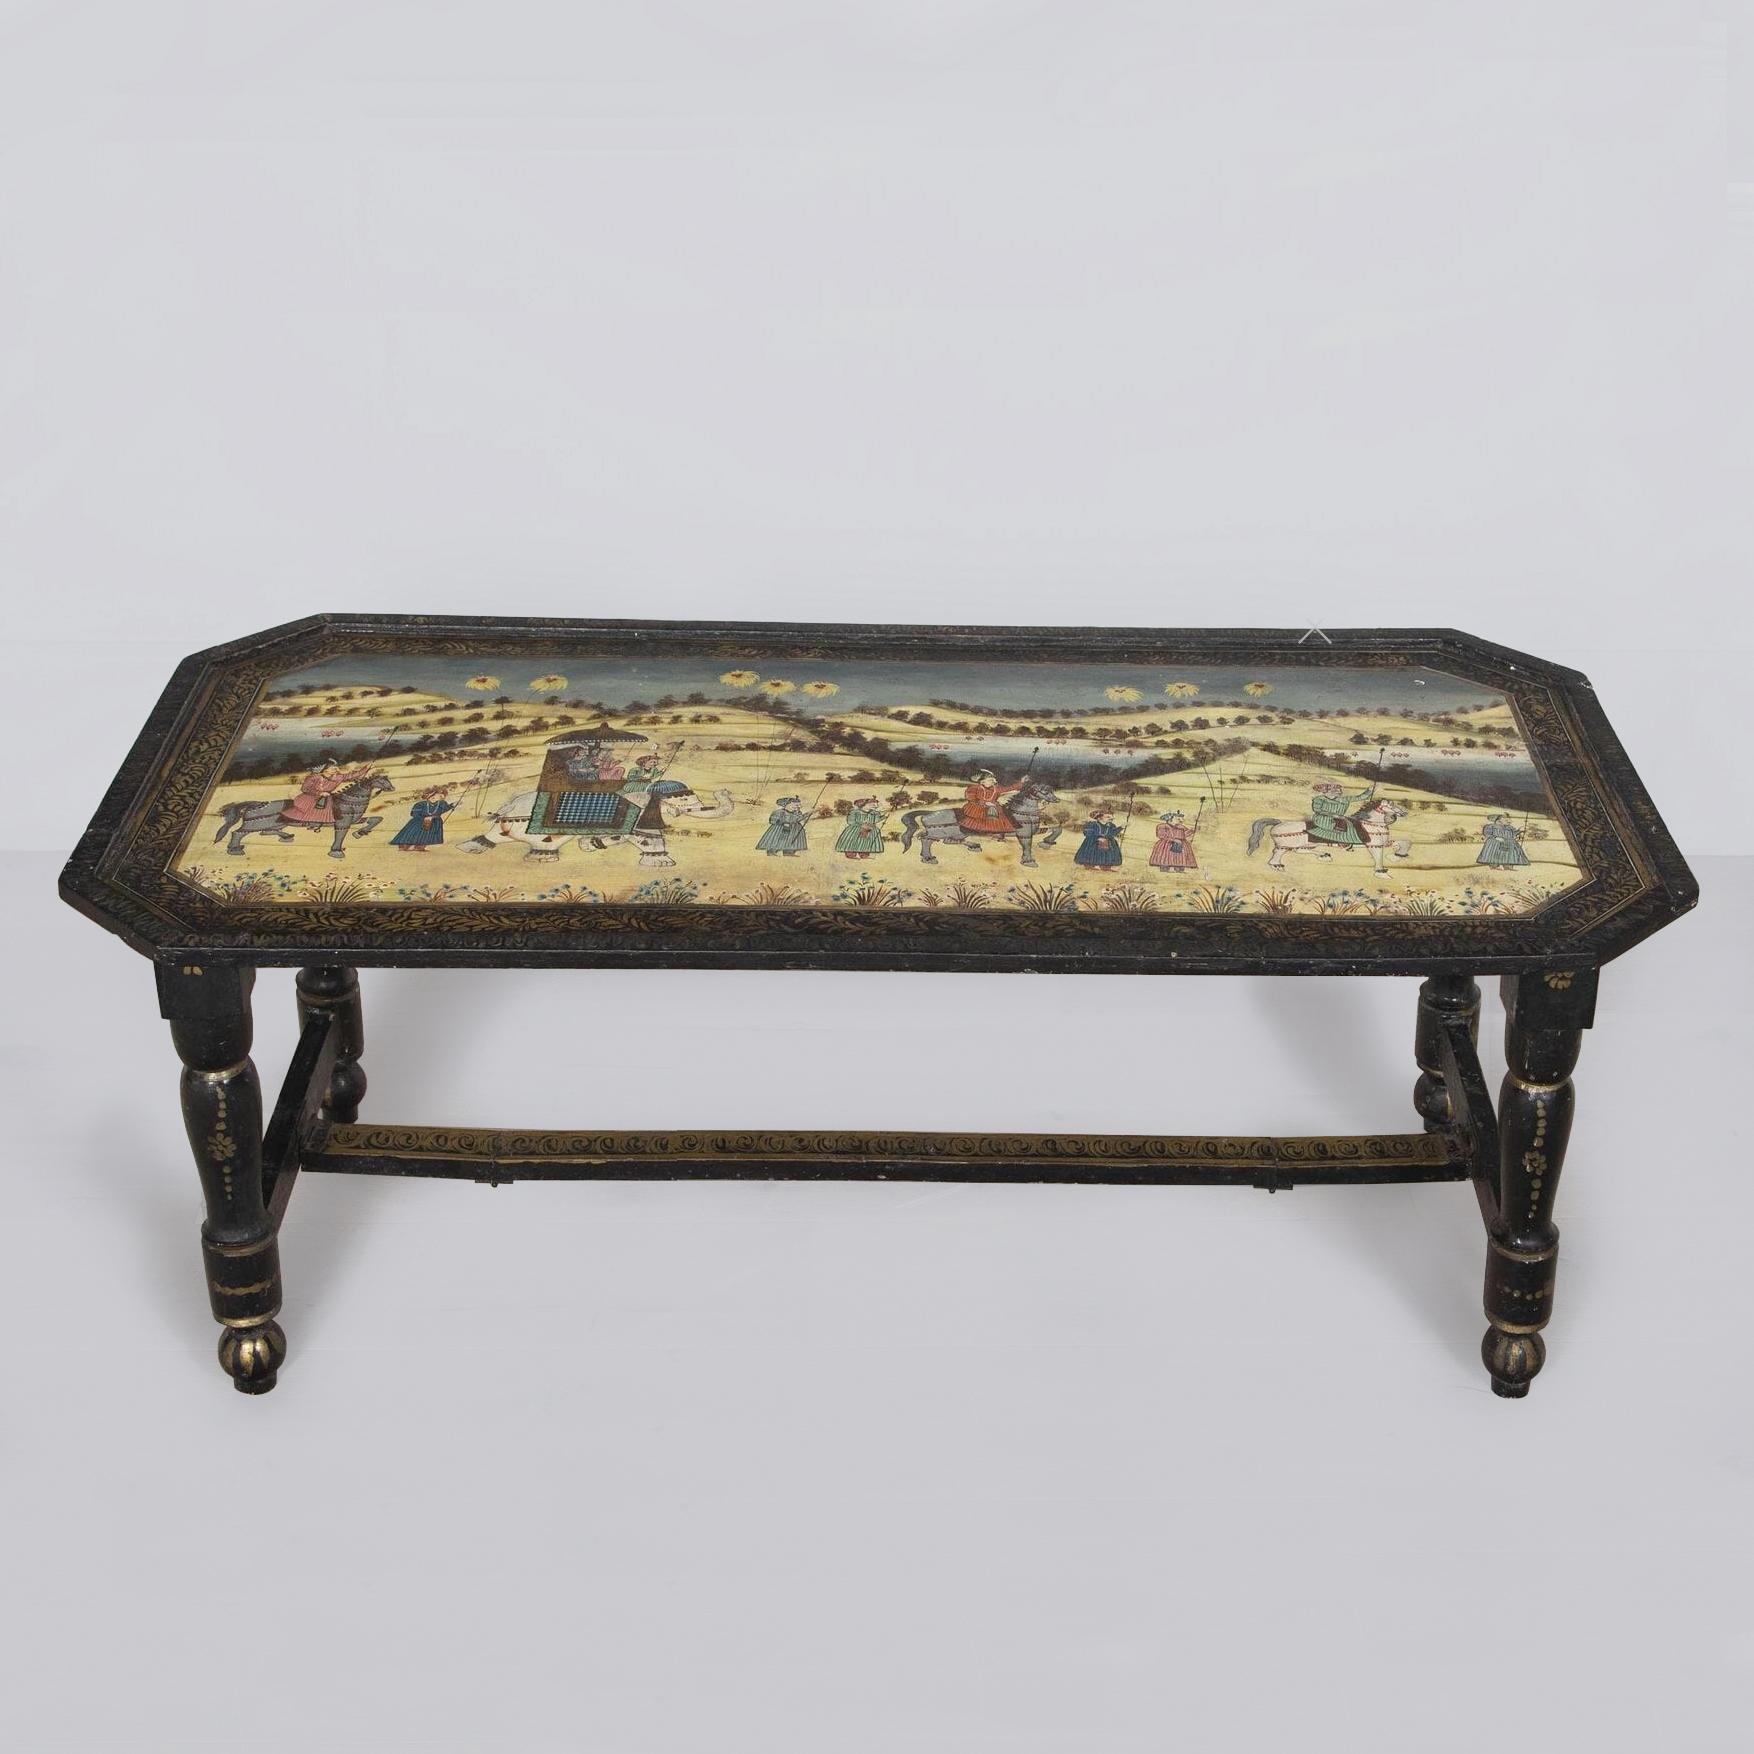 19th century highly unusual Napoleon III campaign low table decorated with a Mughal procession or festival with an elephant, horses and attendants travelling through a landscape of rolling hills.  The folding ebonised base with gilt decoration.